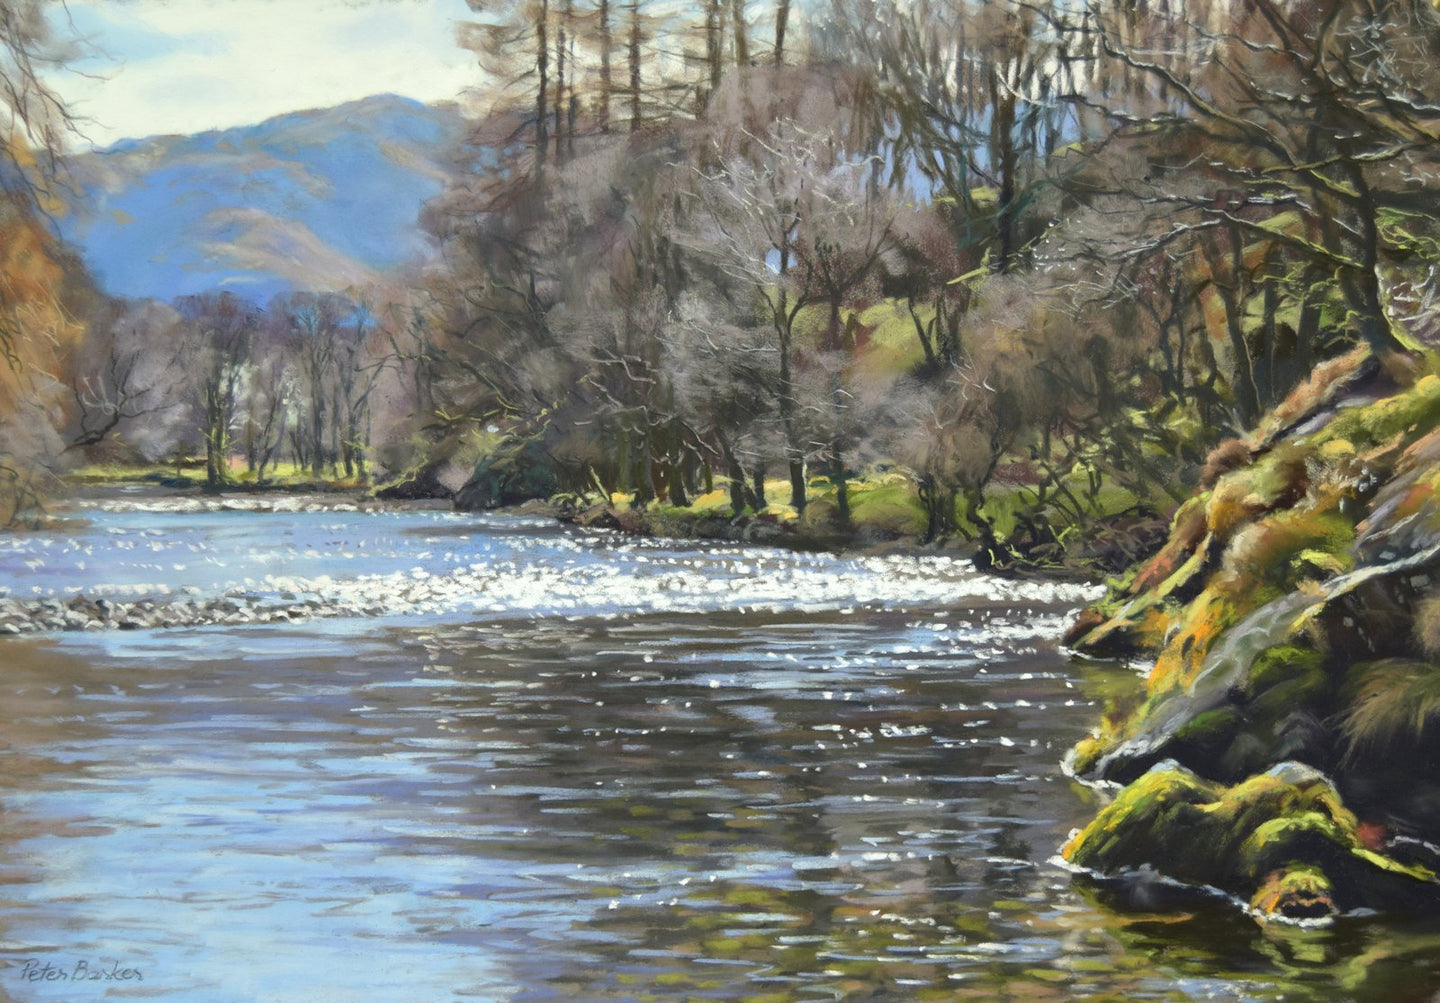 Sparkling Water, Borrowdale, by Peter Barker